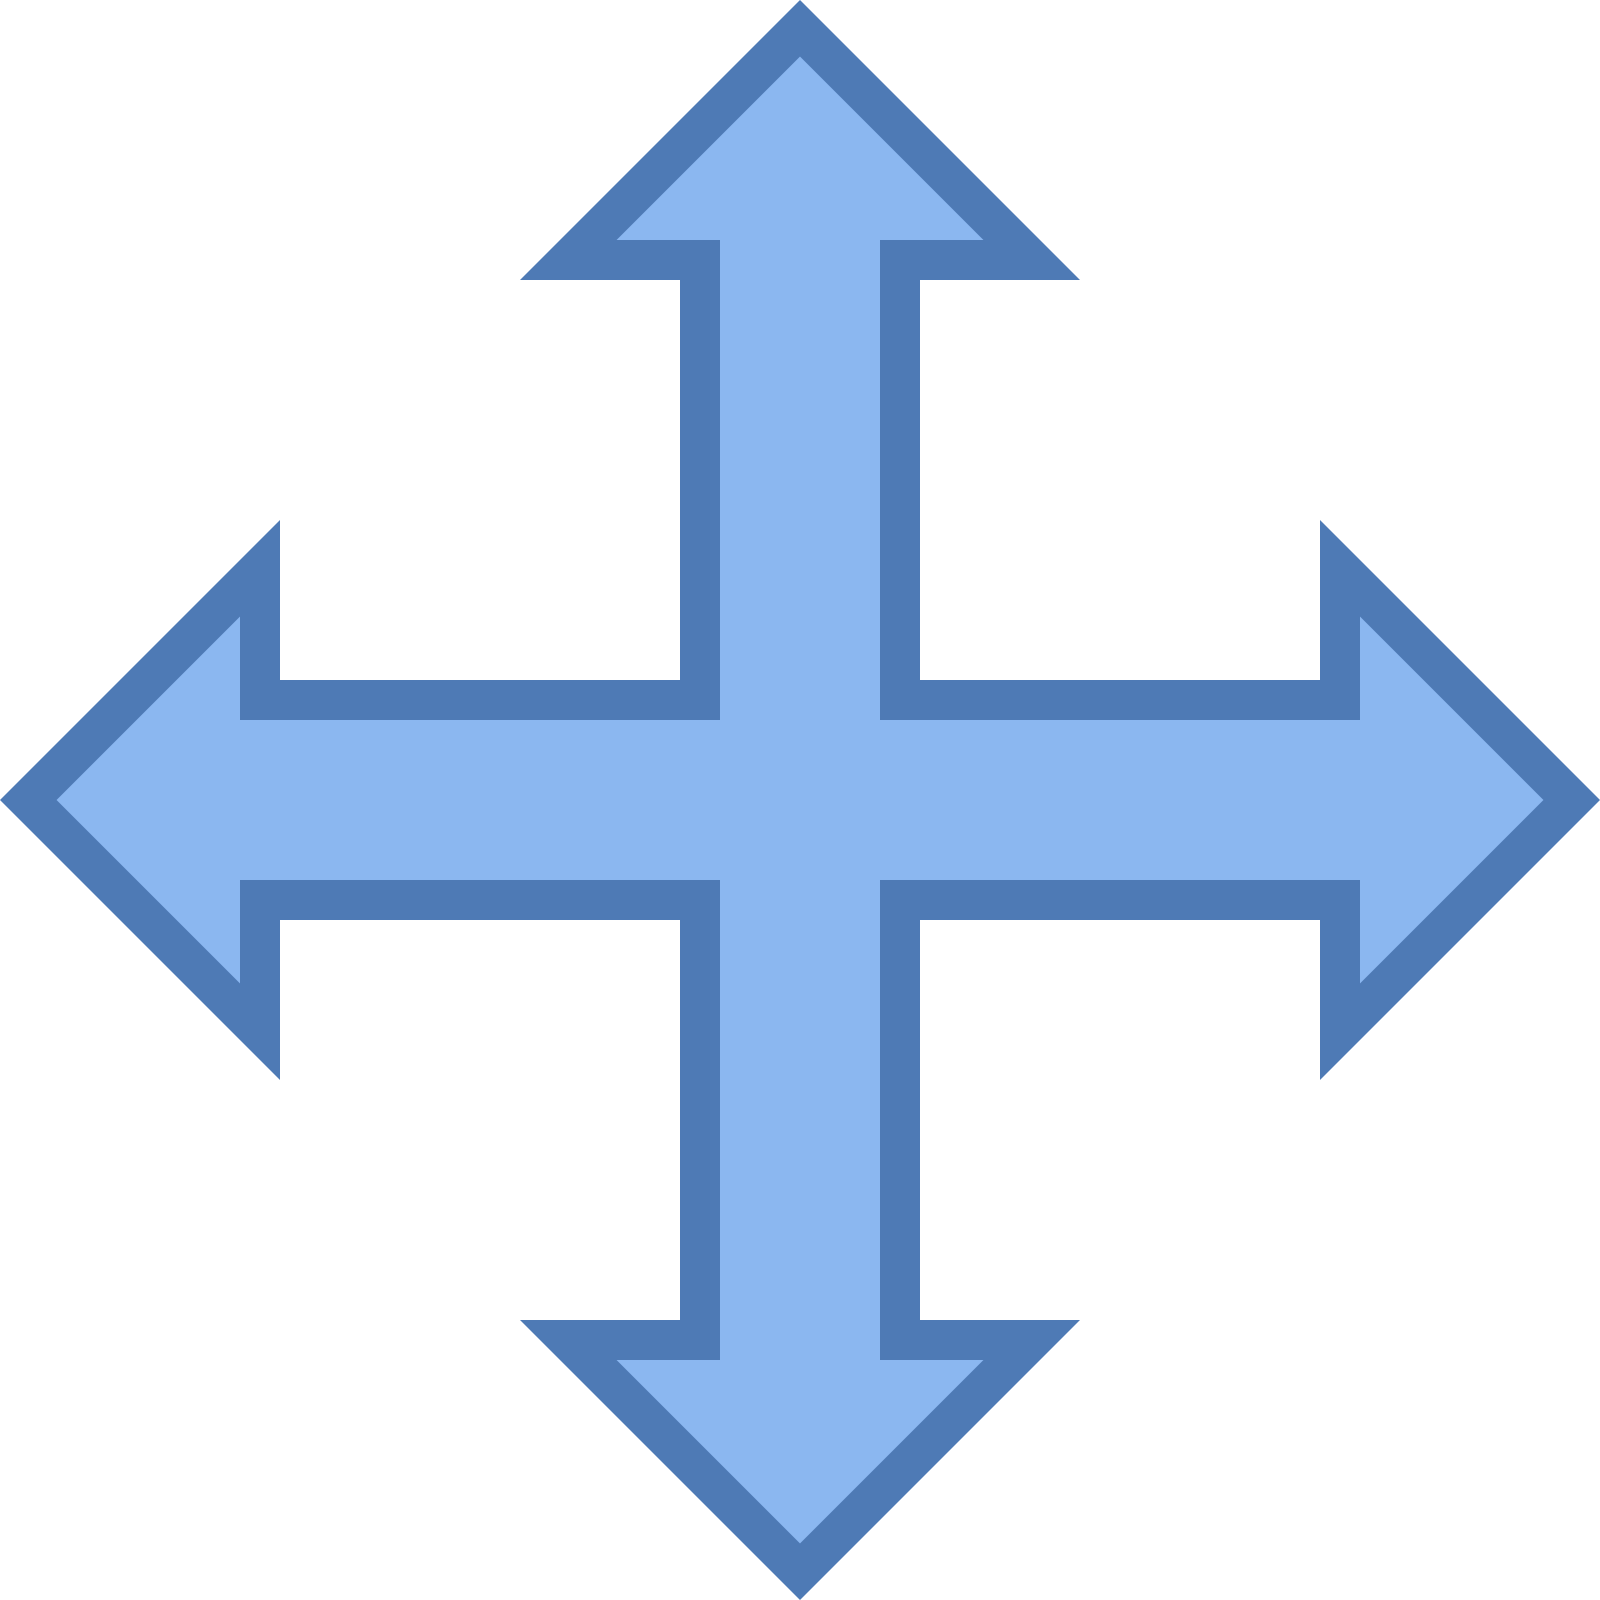 A Blue Arrows Pointing To Different Directions